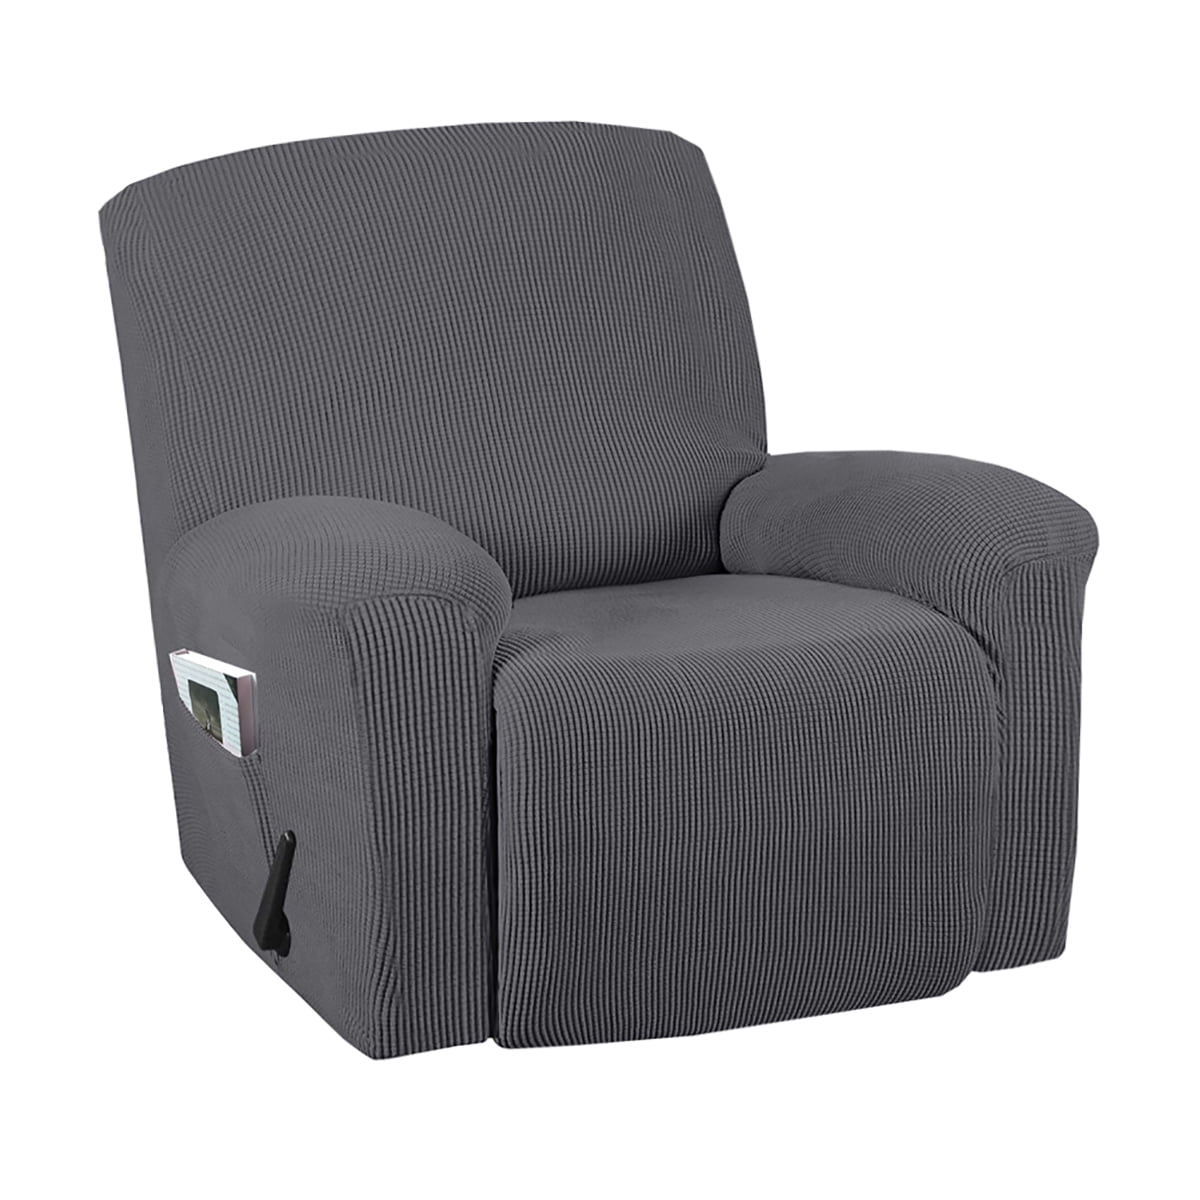 4 Pieces Stretch Recliner Slipcover Fit Furniture Chair Cover with Side Pocket 